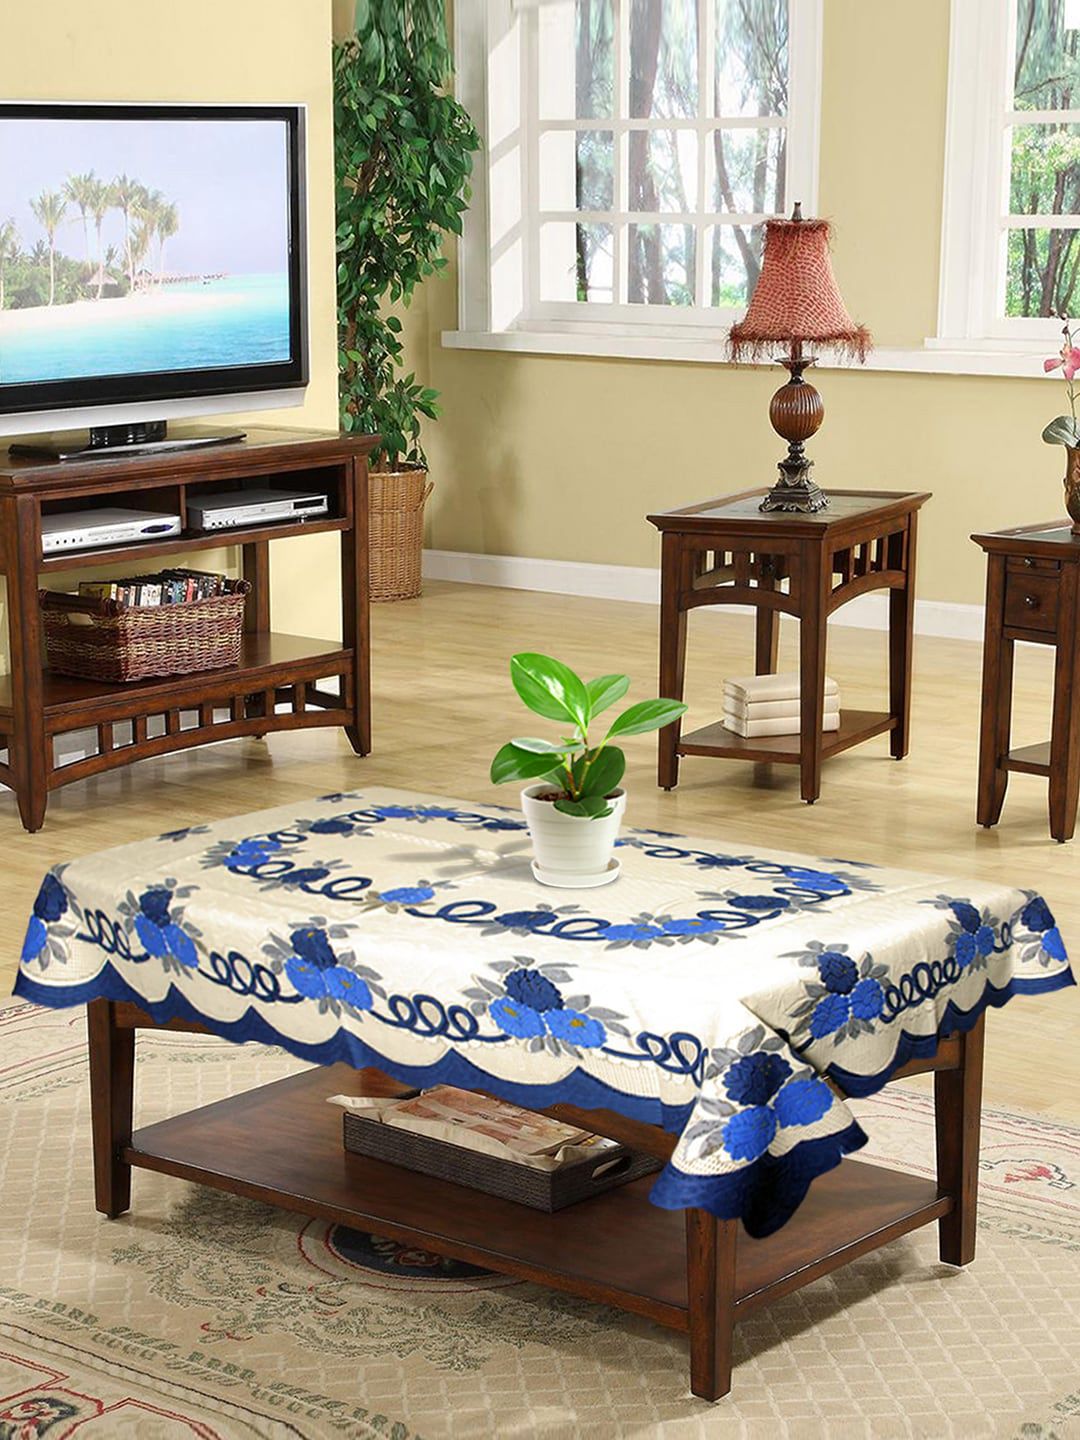 Kuber Industries Cream & Blue Floral Printed 4 Seater Cotton Table Cover Price in India